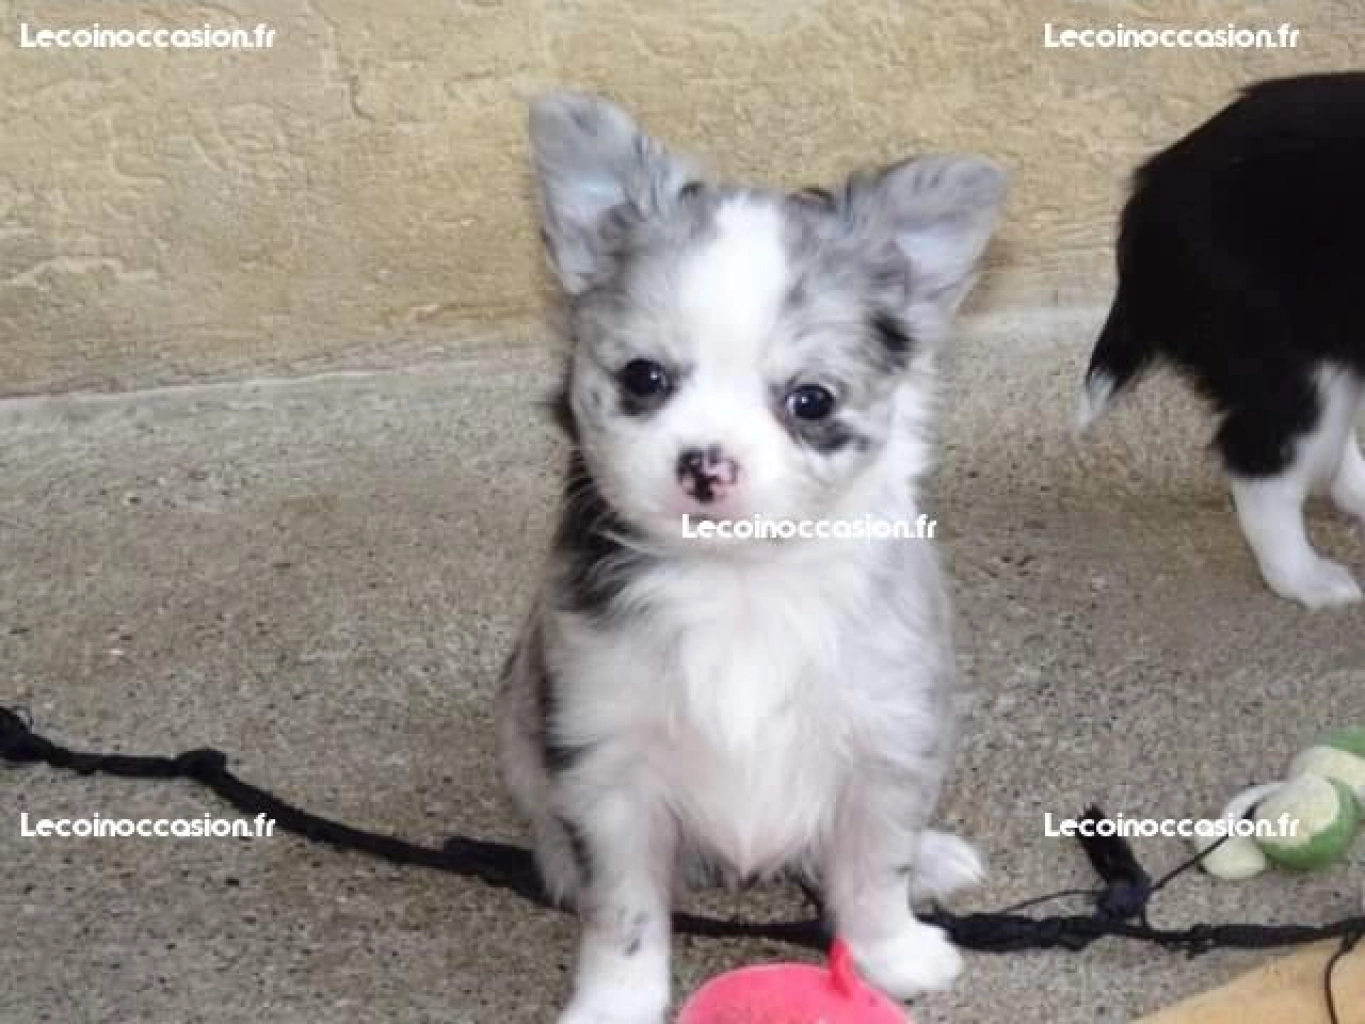 A donner chiot  chihuahua femelle